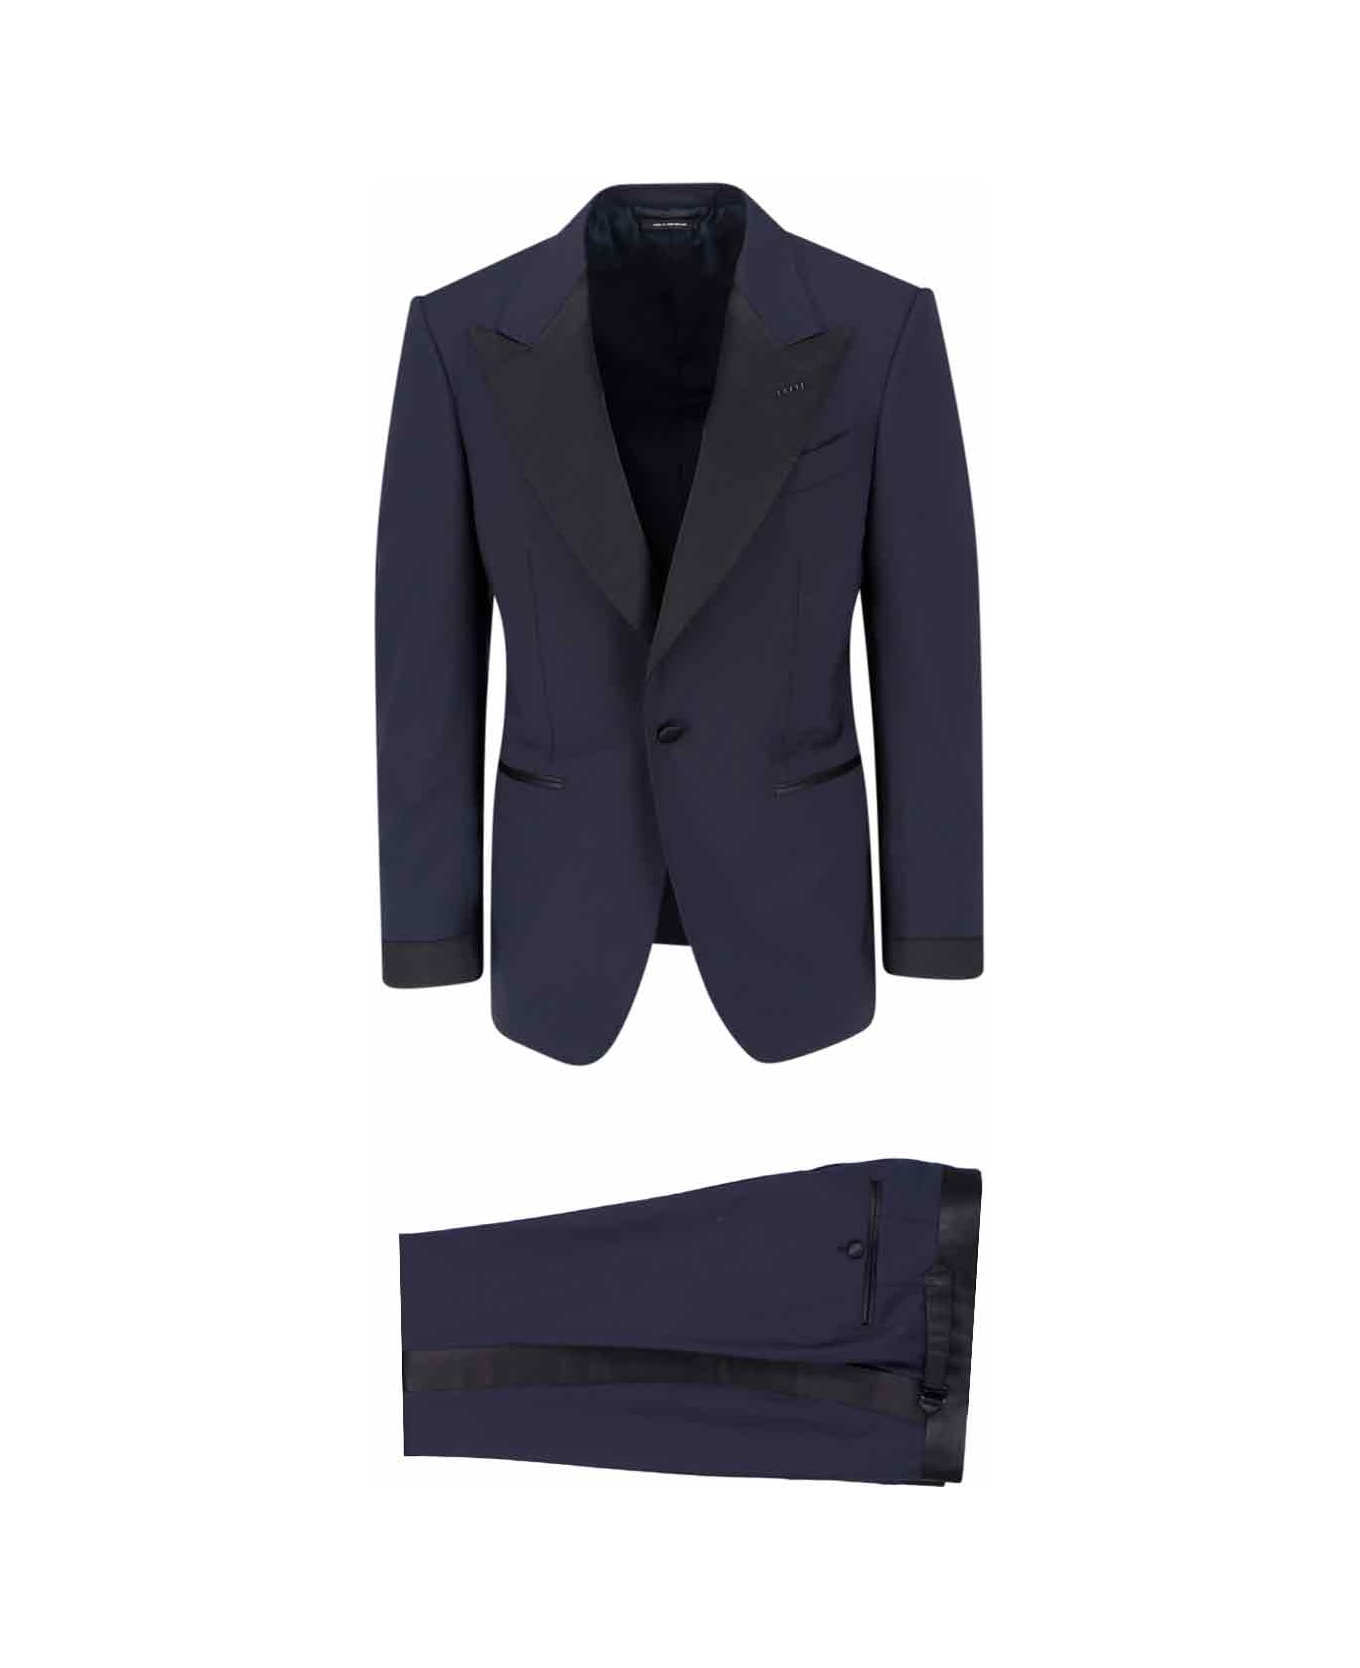 Tom Ford Suit - Blue スーツ